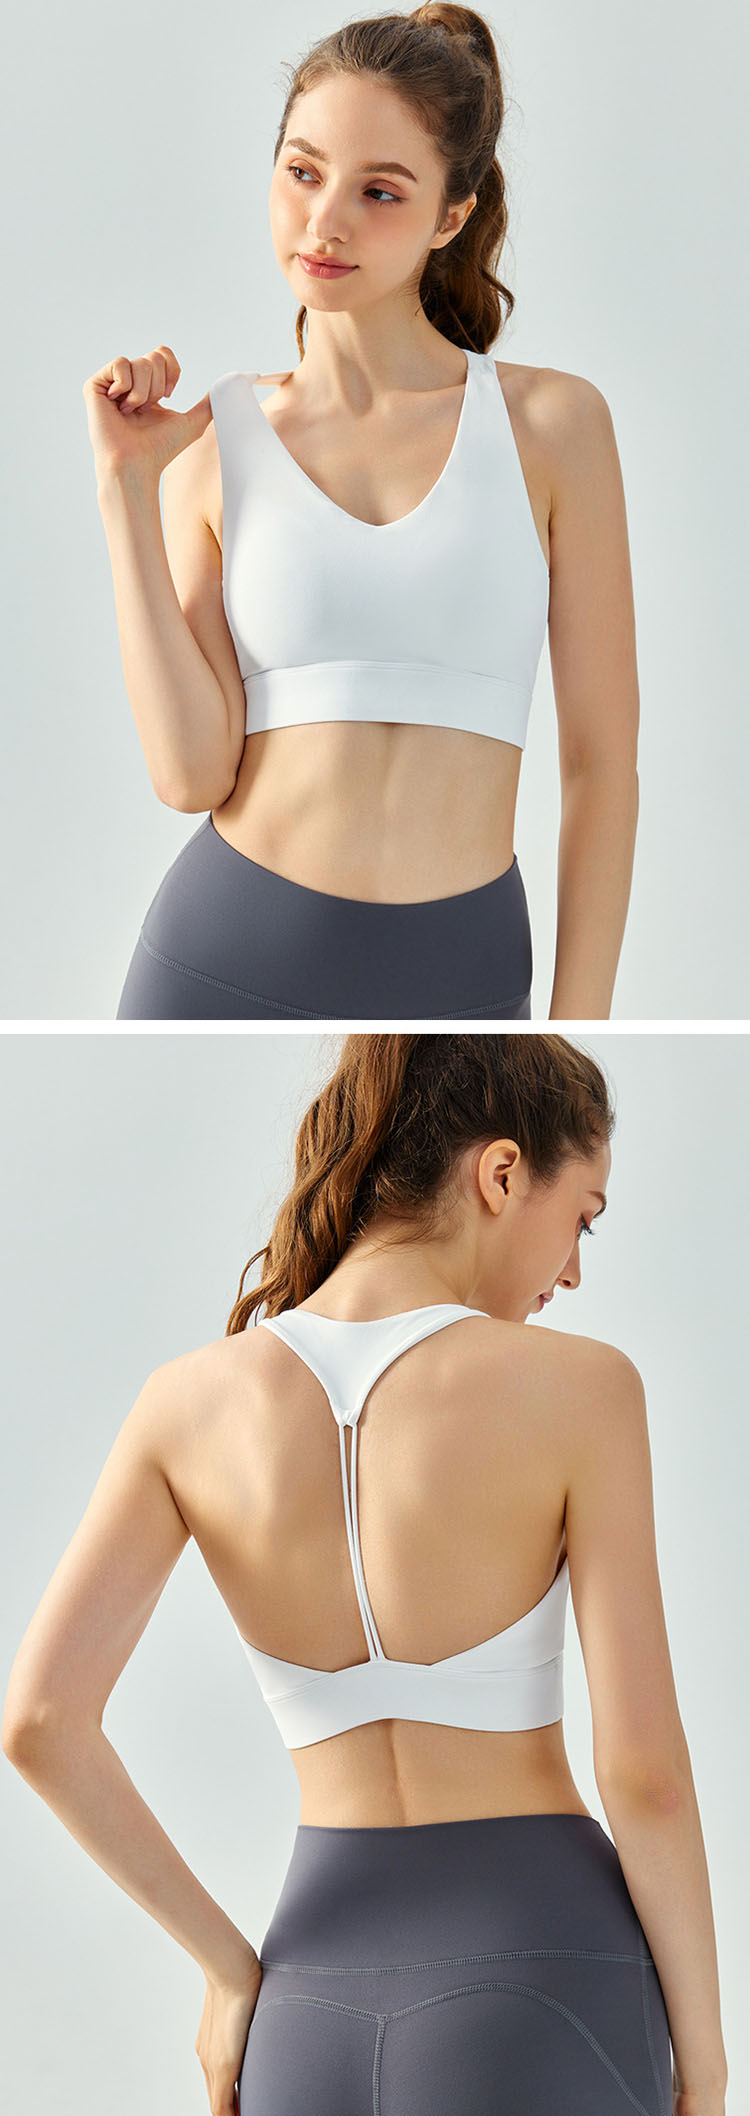 High-quality fabrics are used to absorb moisture and sweat, and the exercise experience is enjoyable